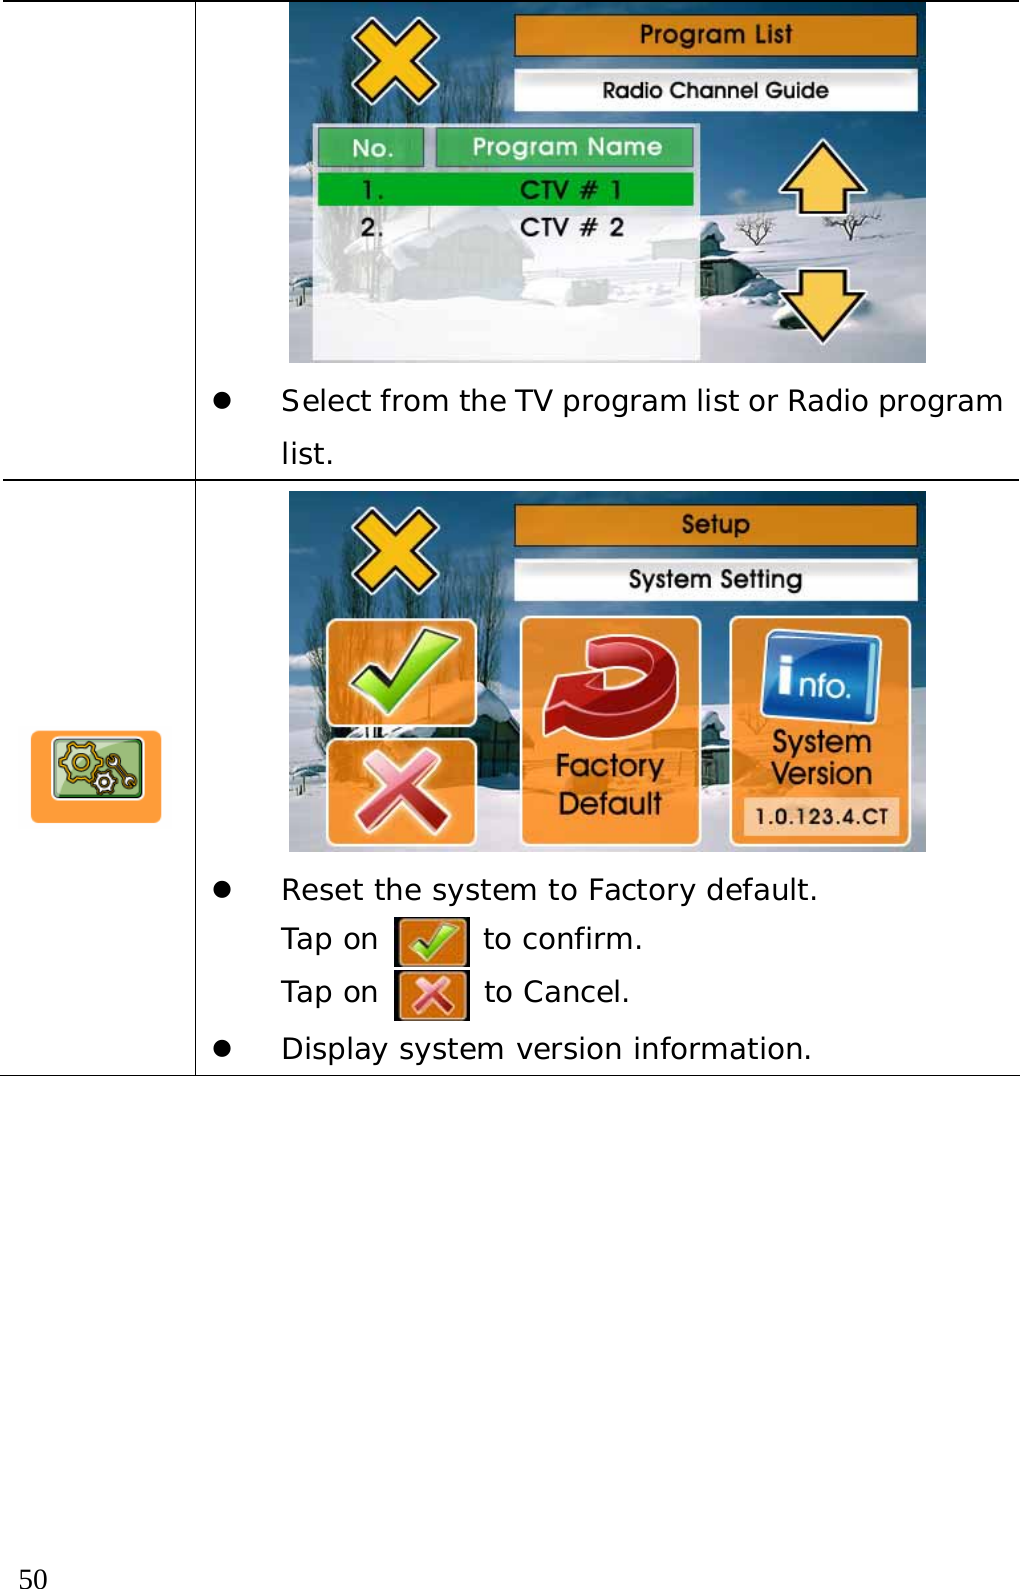  50  z Select from the TV program list or Radio program list.   z Reset the system to Factory default. Tap on   to confirm.  Tap on  to Cancel. z Display system version information.   